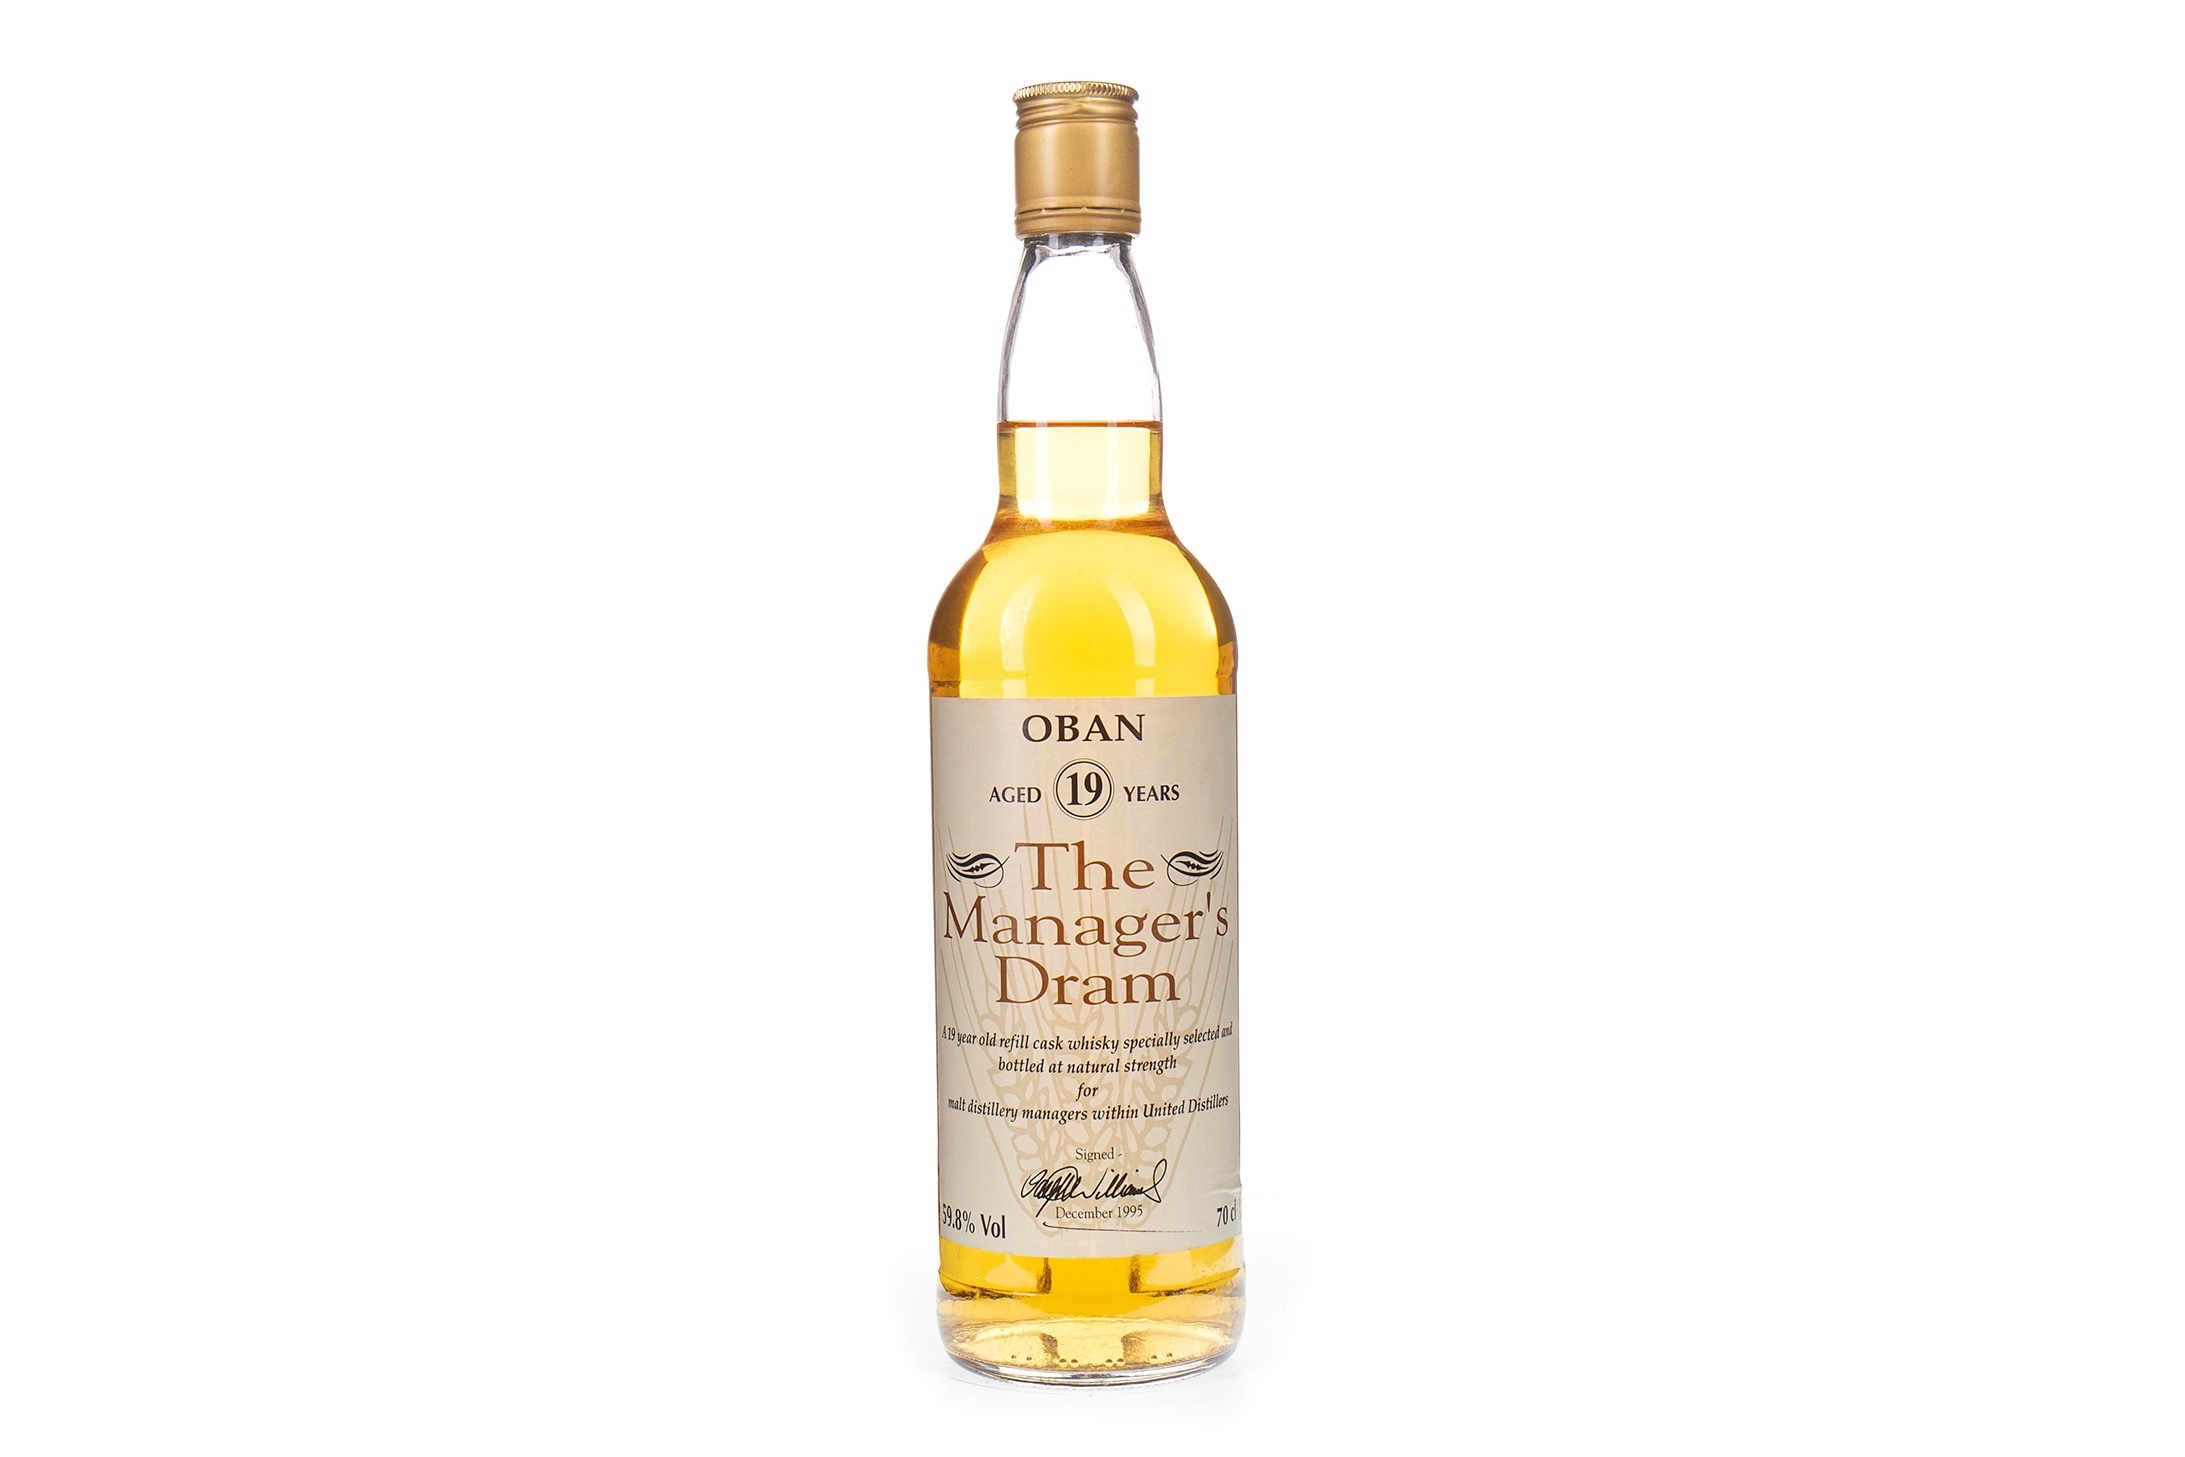 OBAN MANAGERS DRAM AGED 19 YEARS